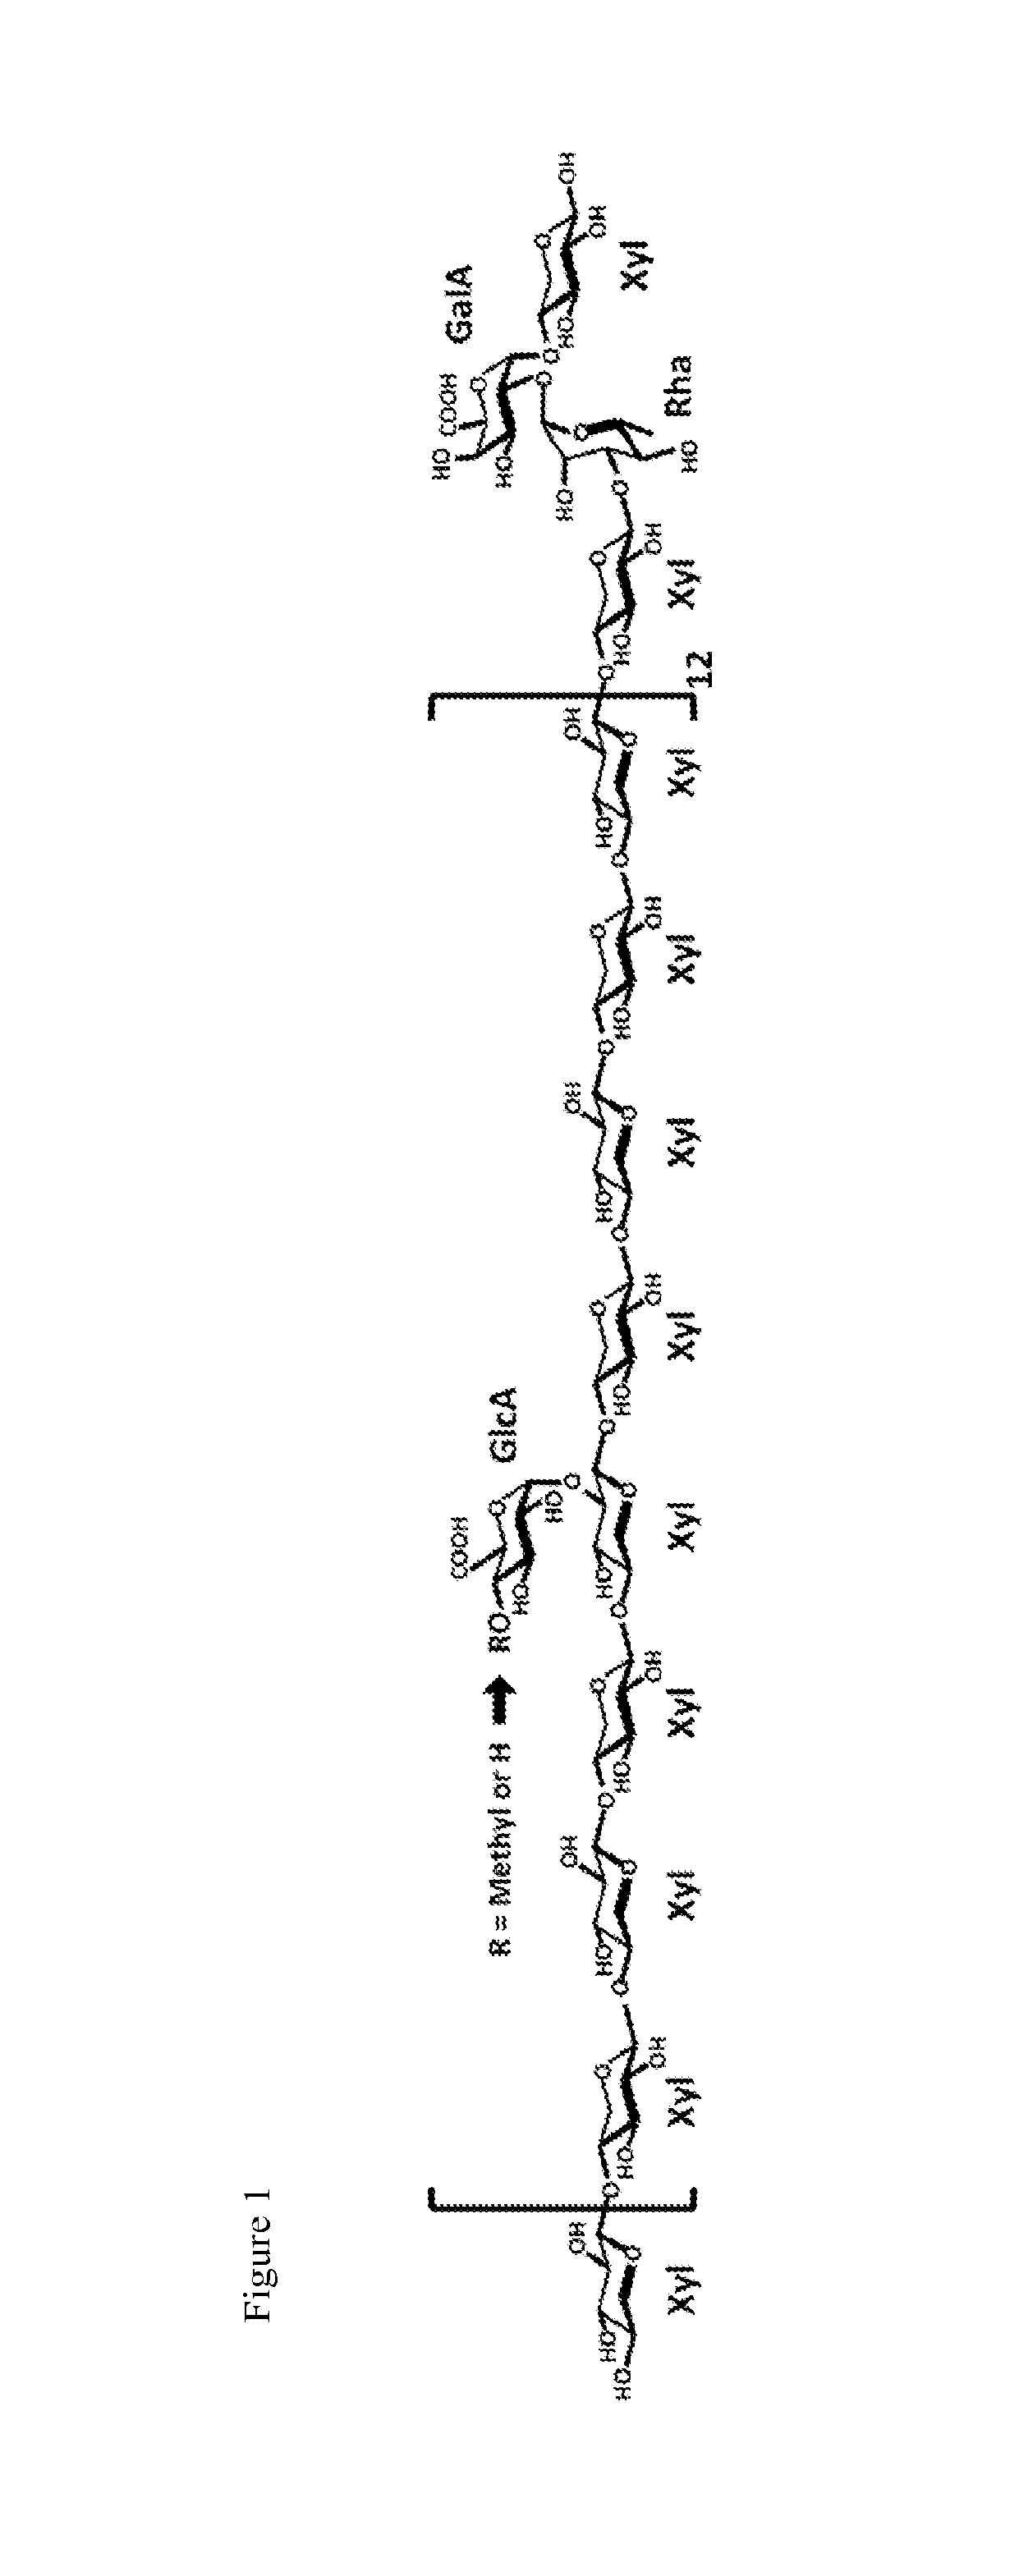 Plants with altered glucuronoxylan methyl transferase activity and methods of use